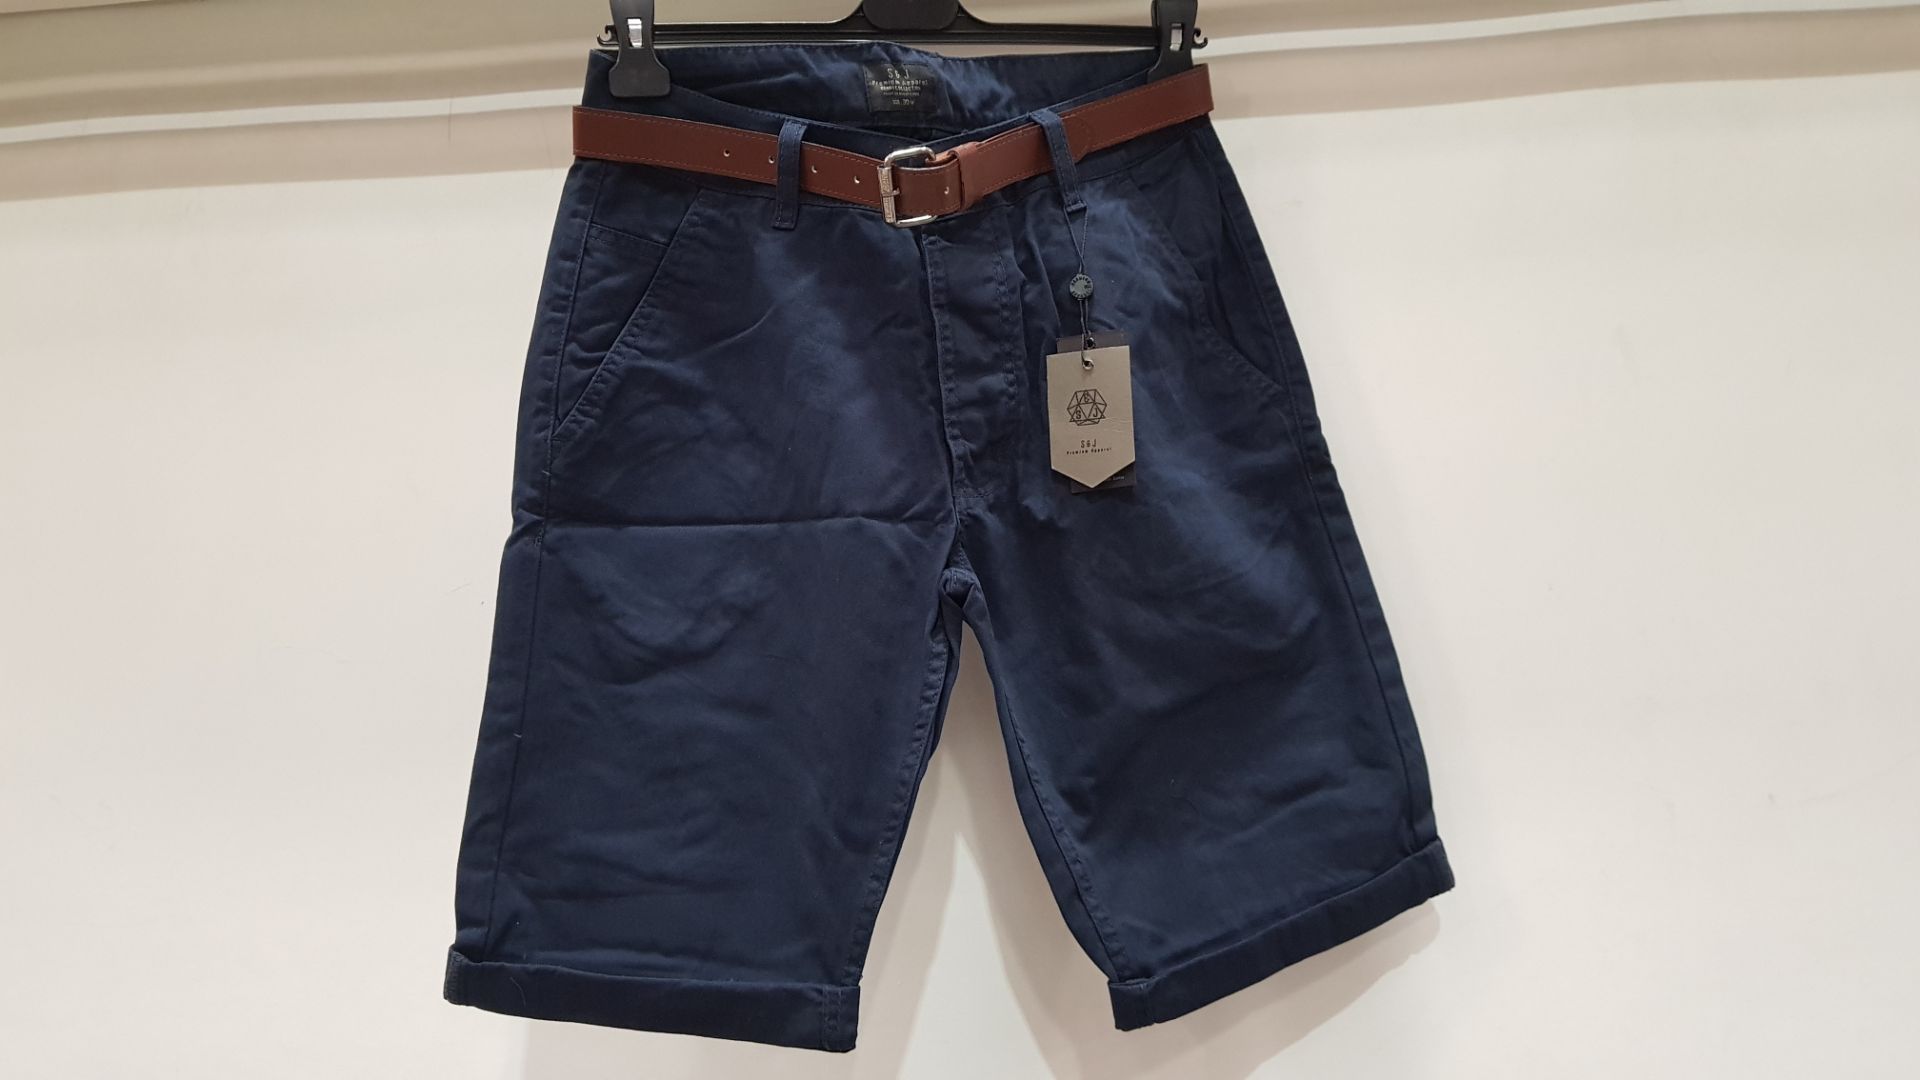 8 X BRAND NEW S & J CHINO SHORTS WITH BELT SIZE 30W IN NAVY - RRP EACH £29.99 TOTAL £239.92